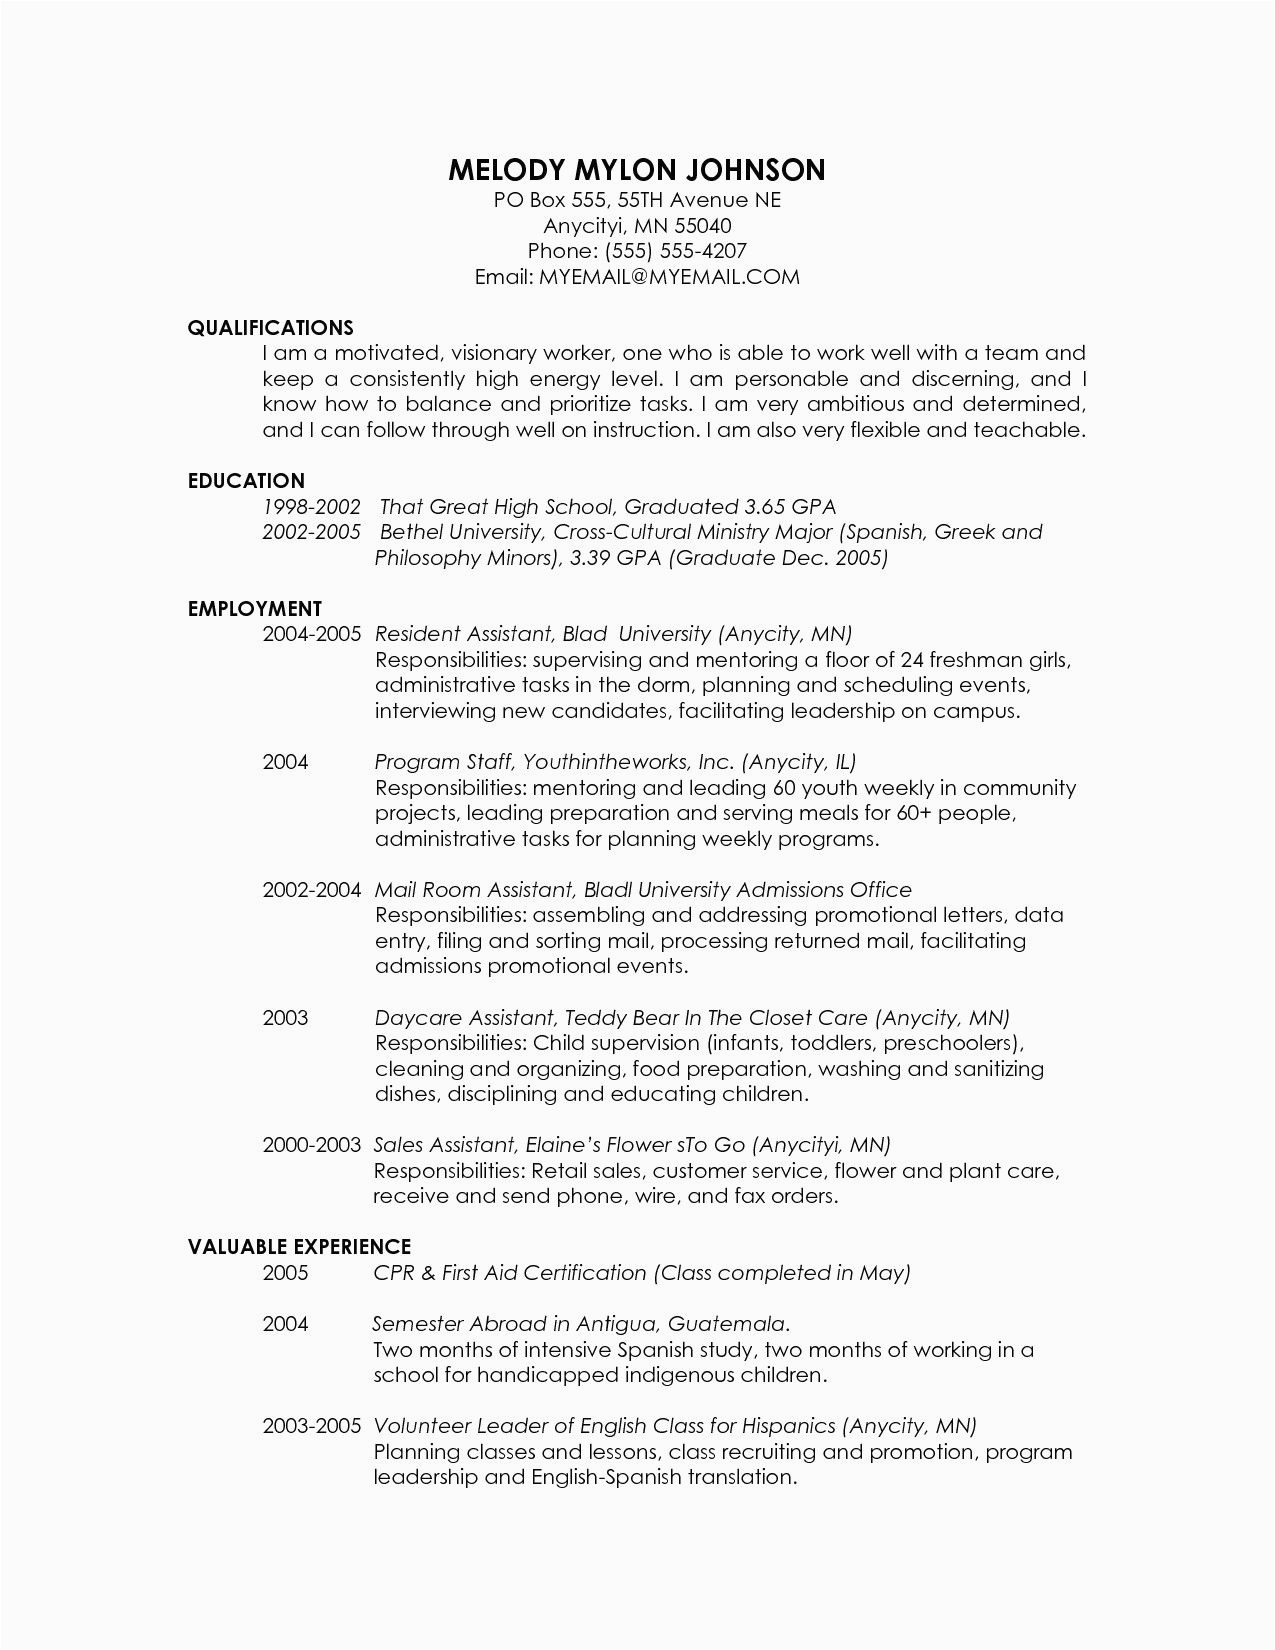 Resume Template for Applying to Graduate School Resume Templates Grad School